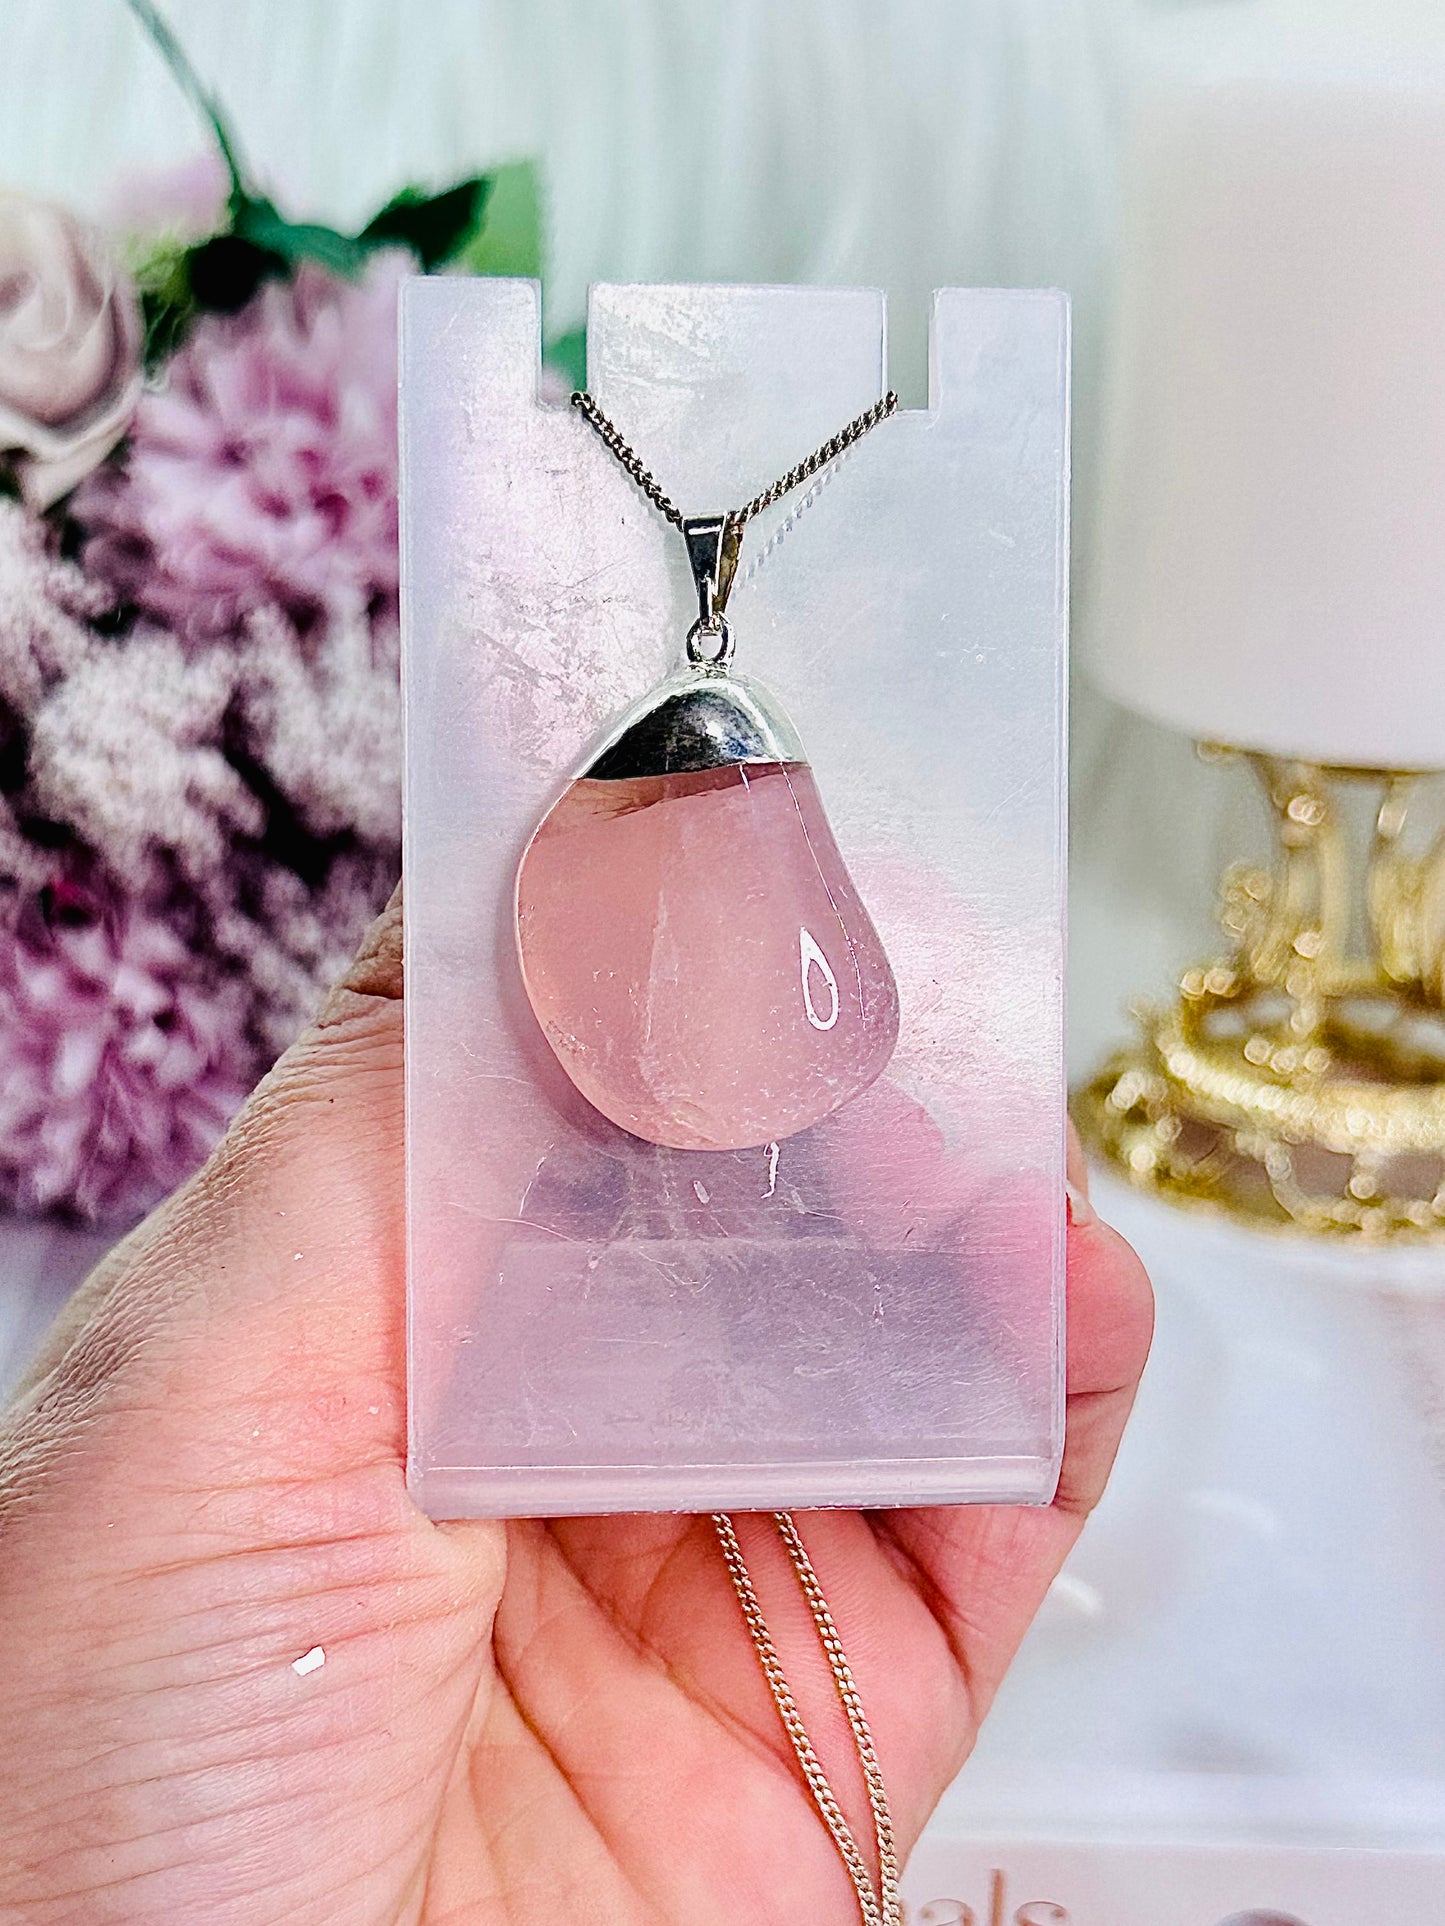 Stunning Silver Plated Chunky Rose Quartz Pendant In Gift Bag From Brazil